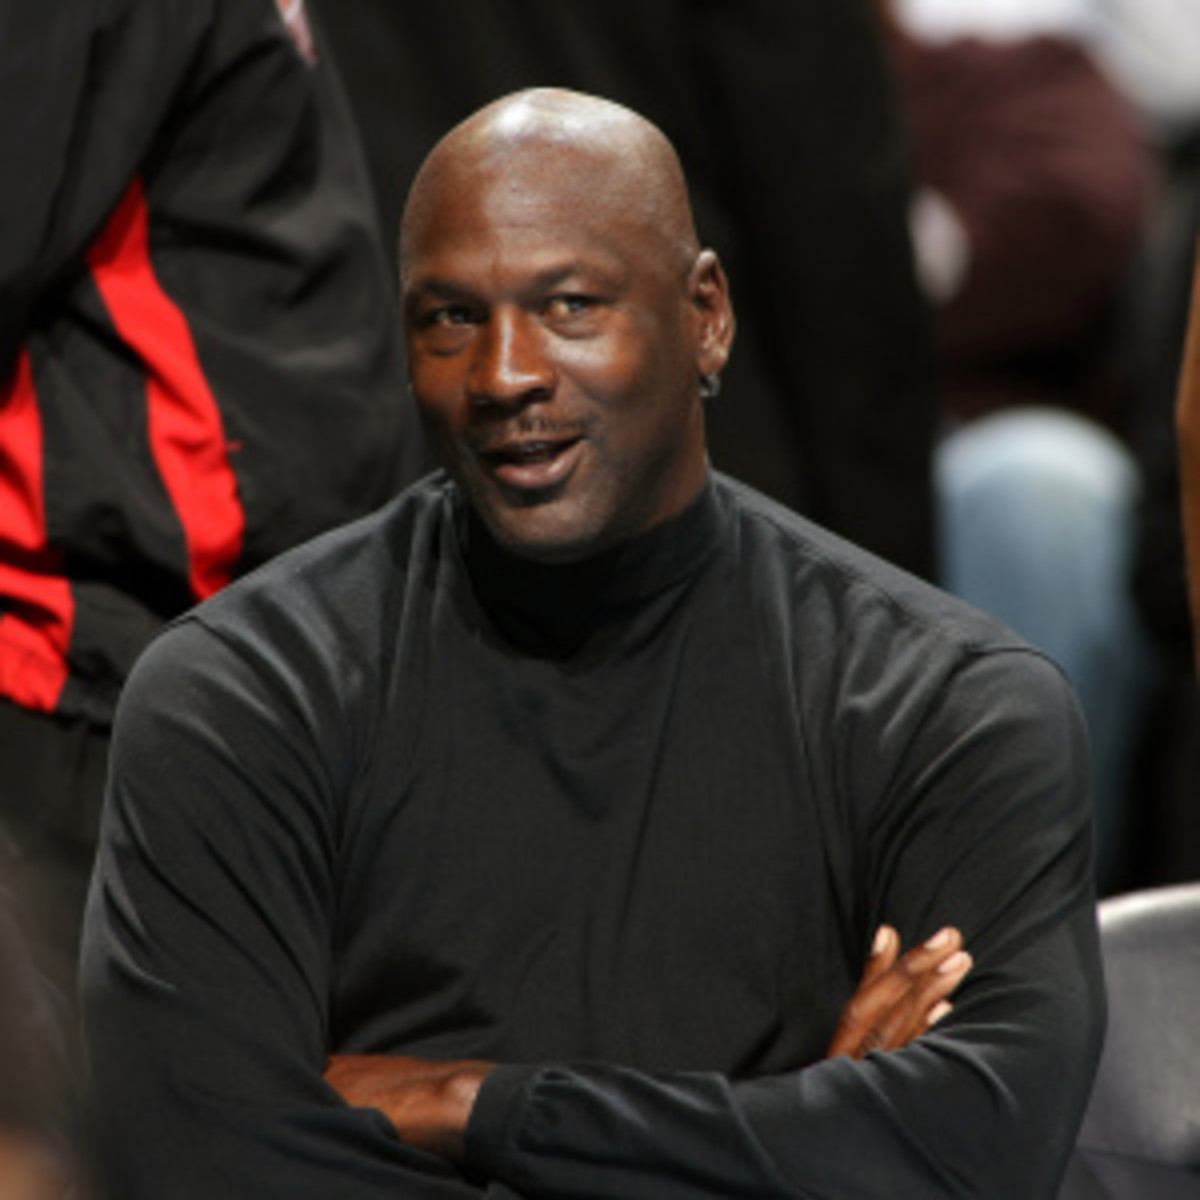 Michael Jordan asked a Georgia court on Monday to dismiss a paternity suit against him. (Kent Smith/Getty Images)